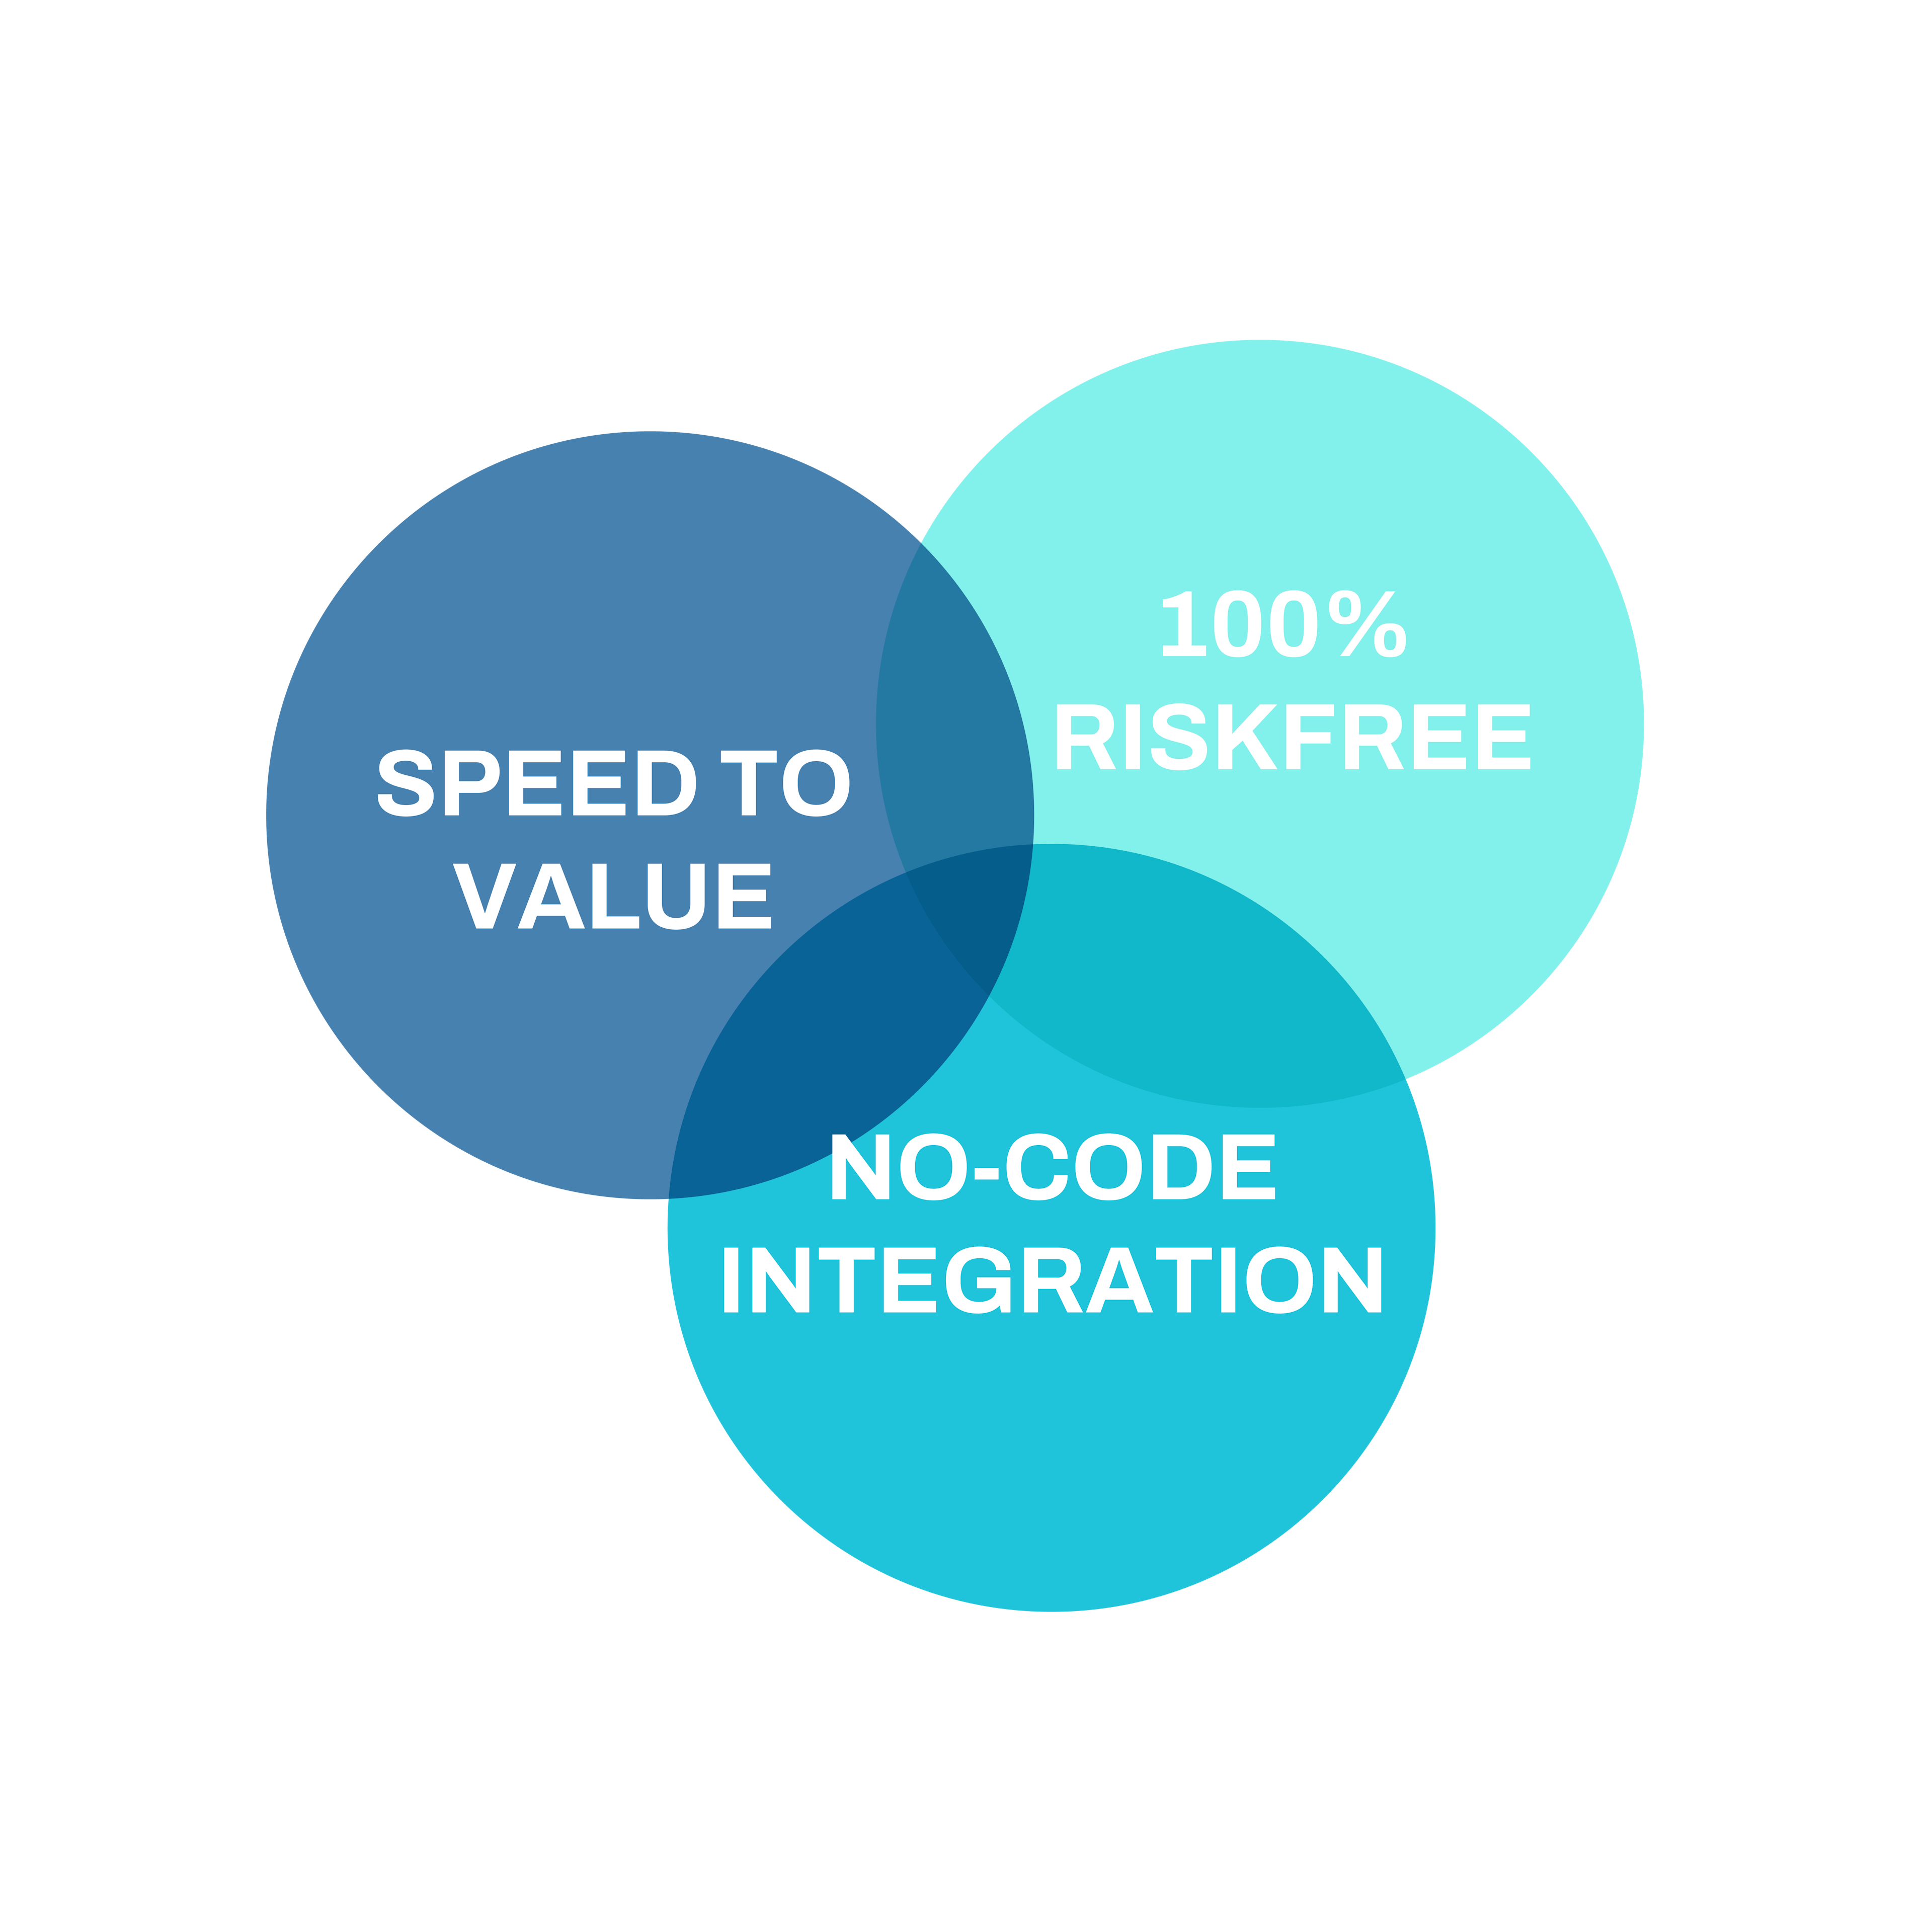 Galileo Conigma Connect speed to value riskfree no-code integration